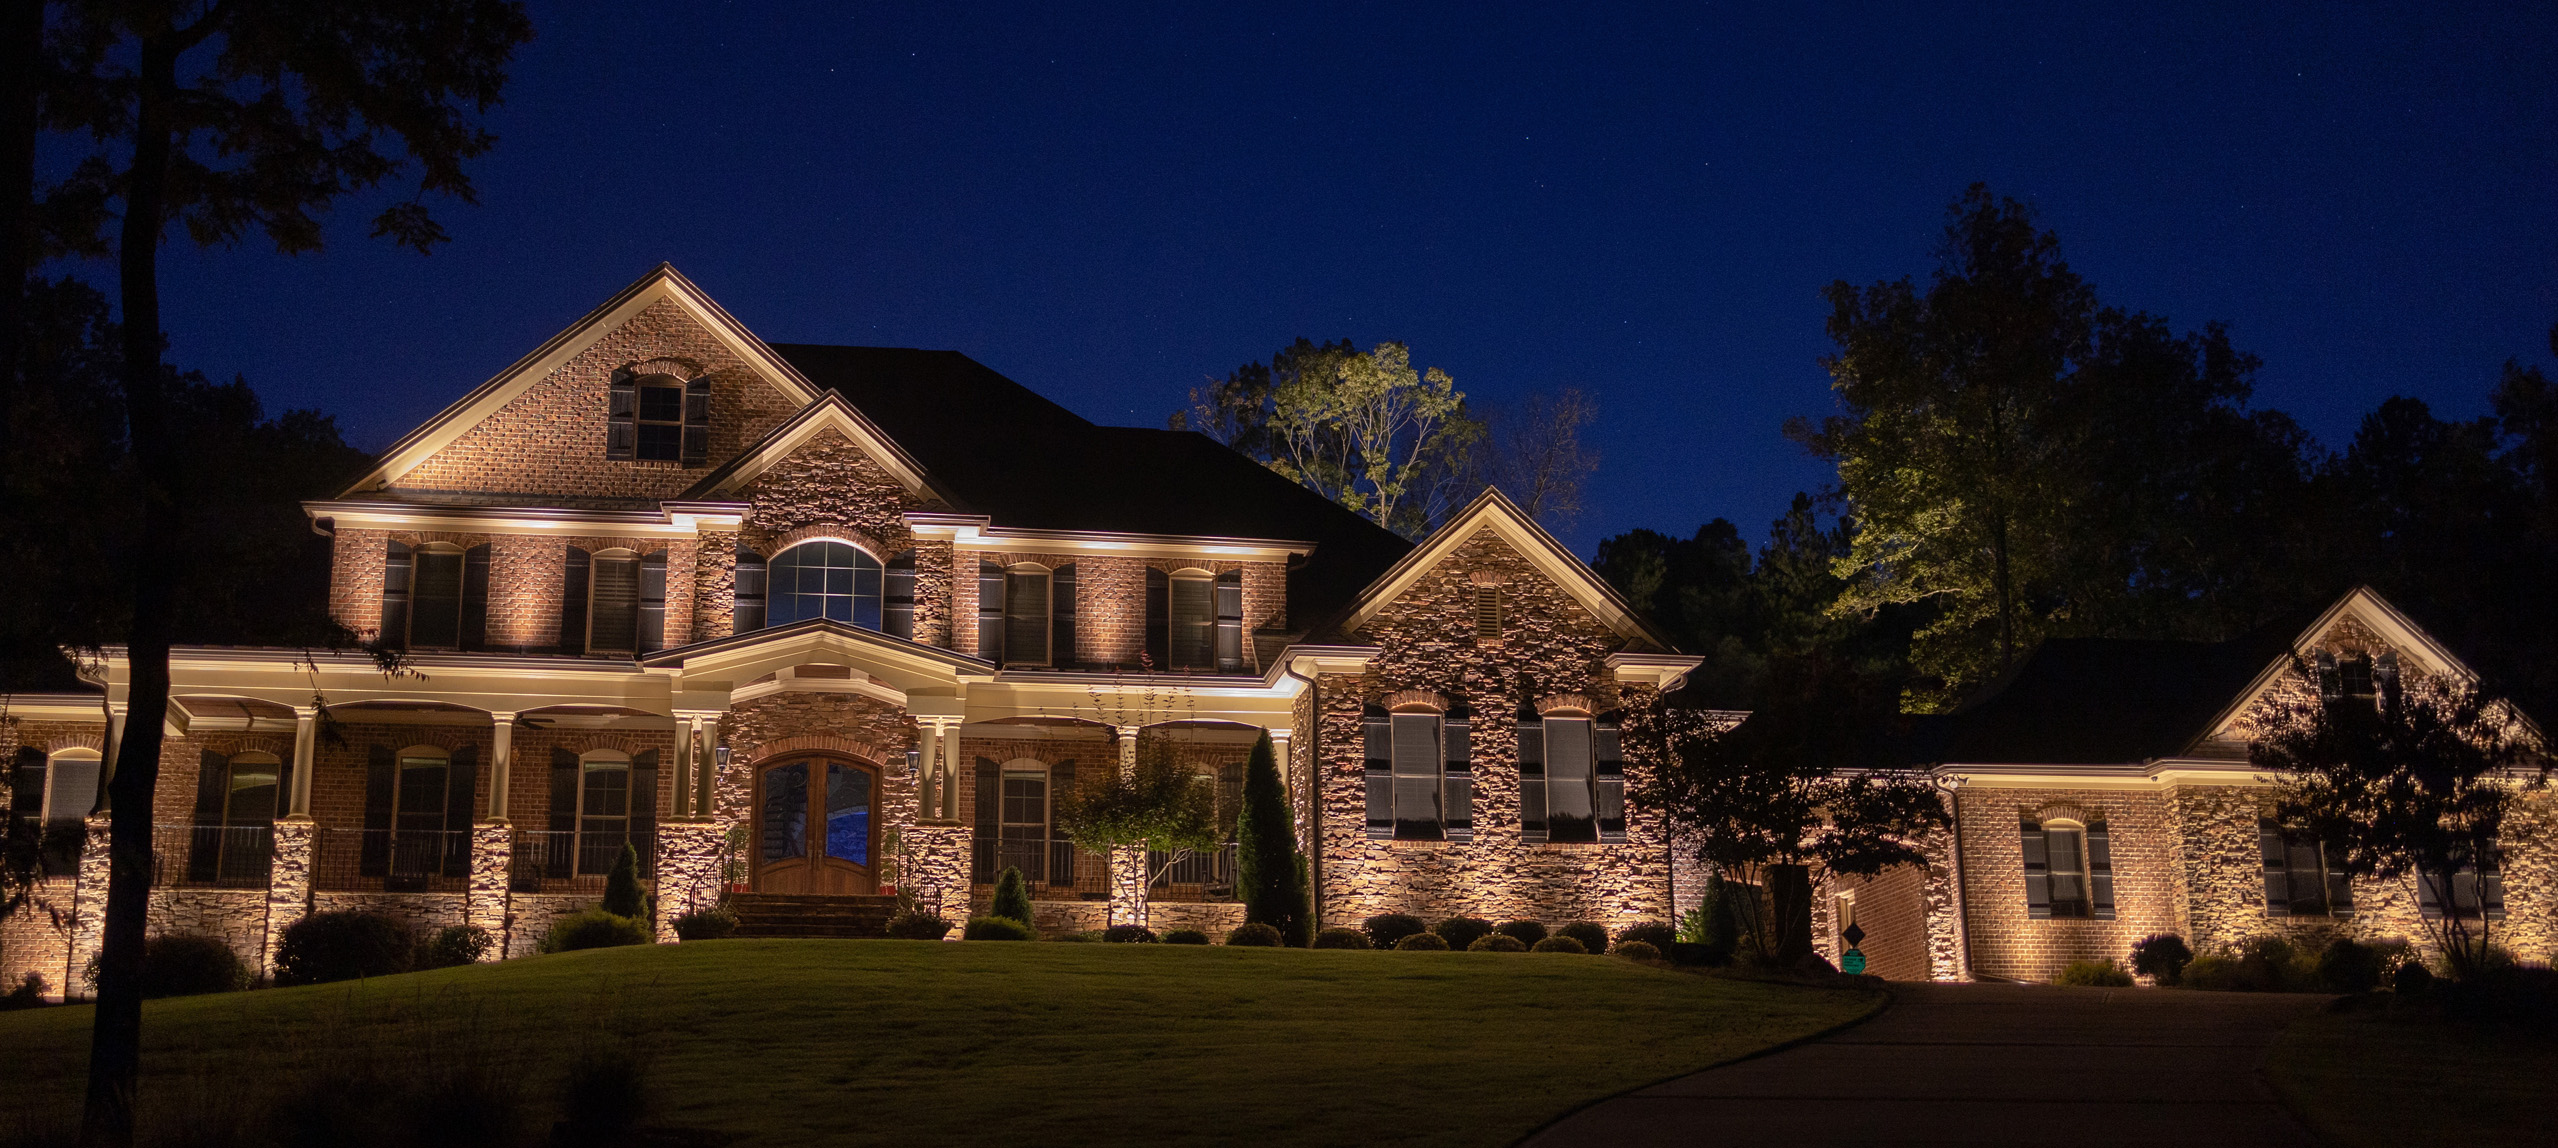 Safety & Security Through Quality Outdoor Lighting